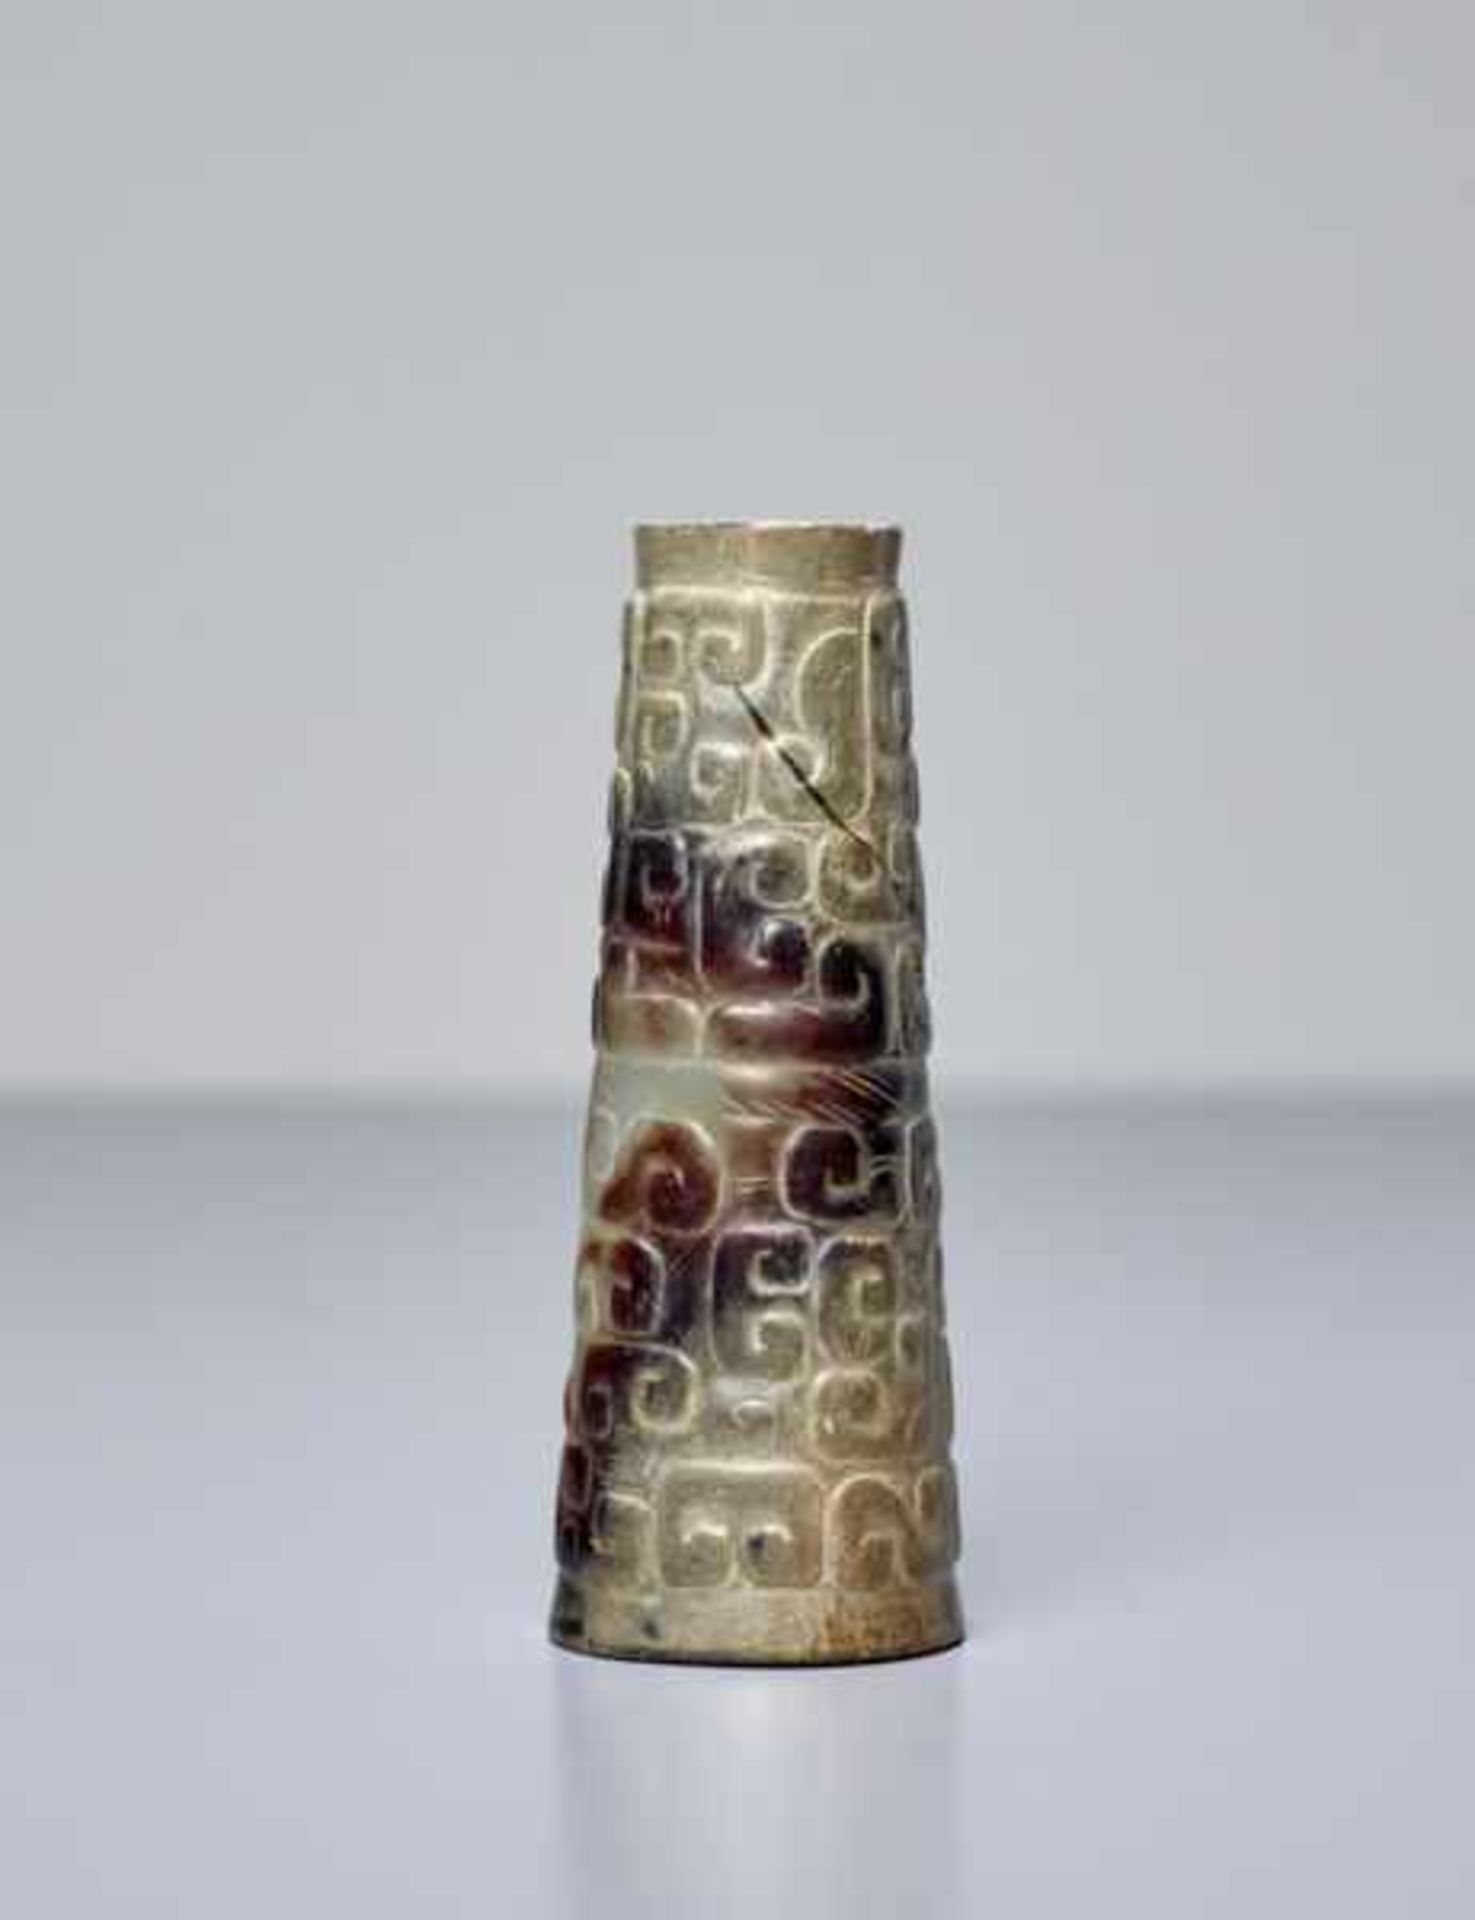 BEAD FROM A NECKLACE Jade. China, Eastern Zhou, 4th-3rd century BCSlender, conical form, the end